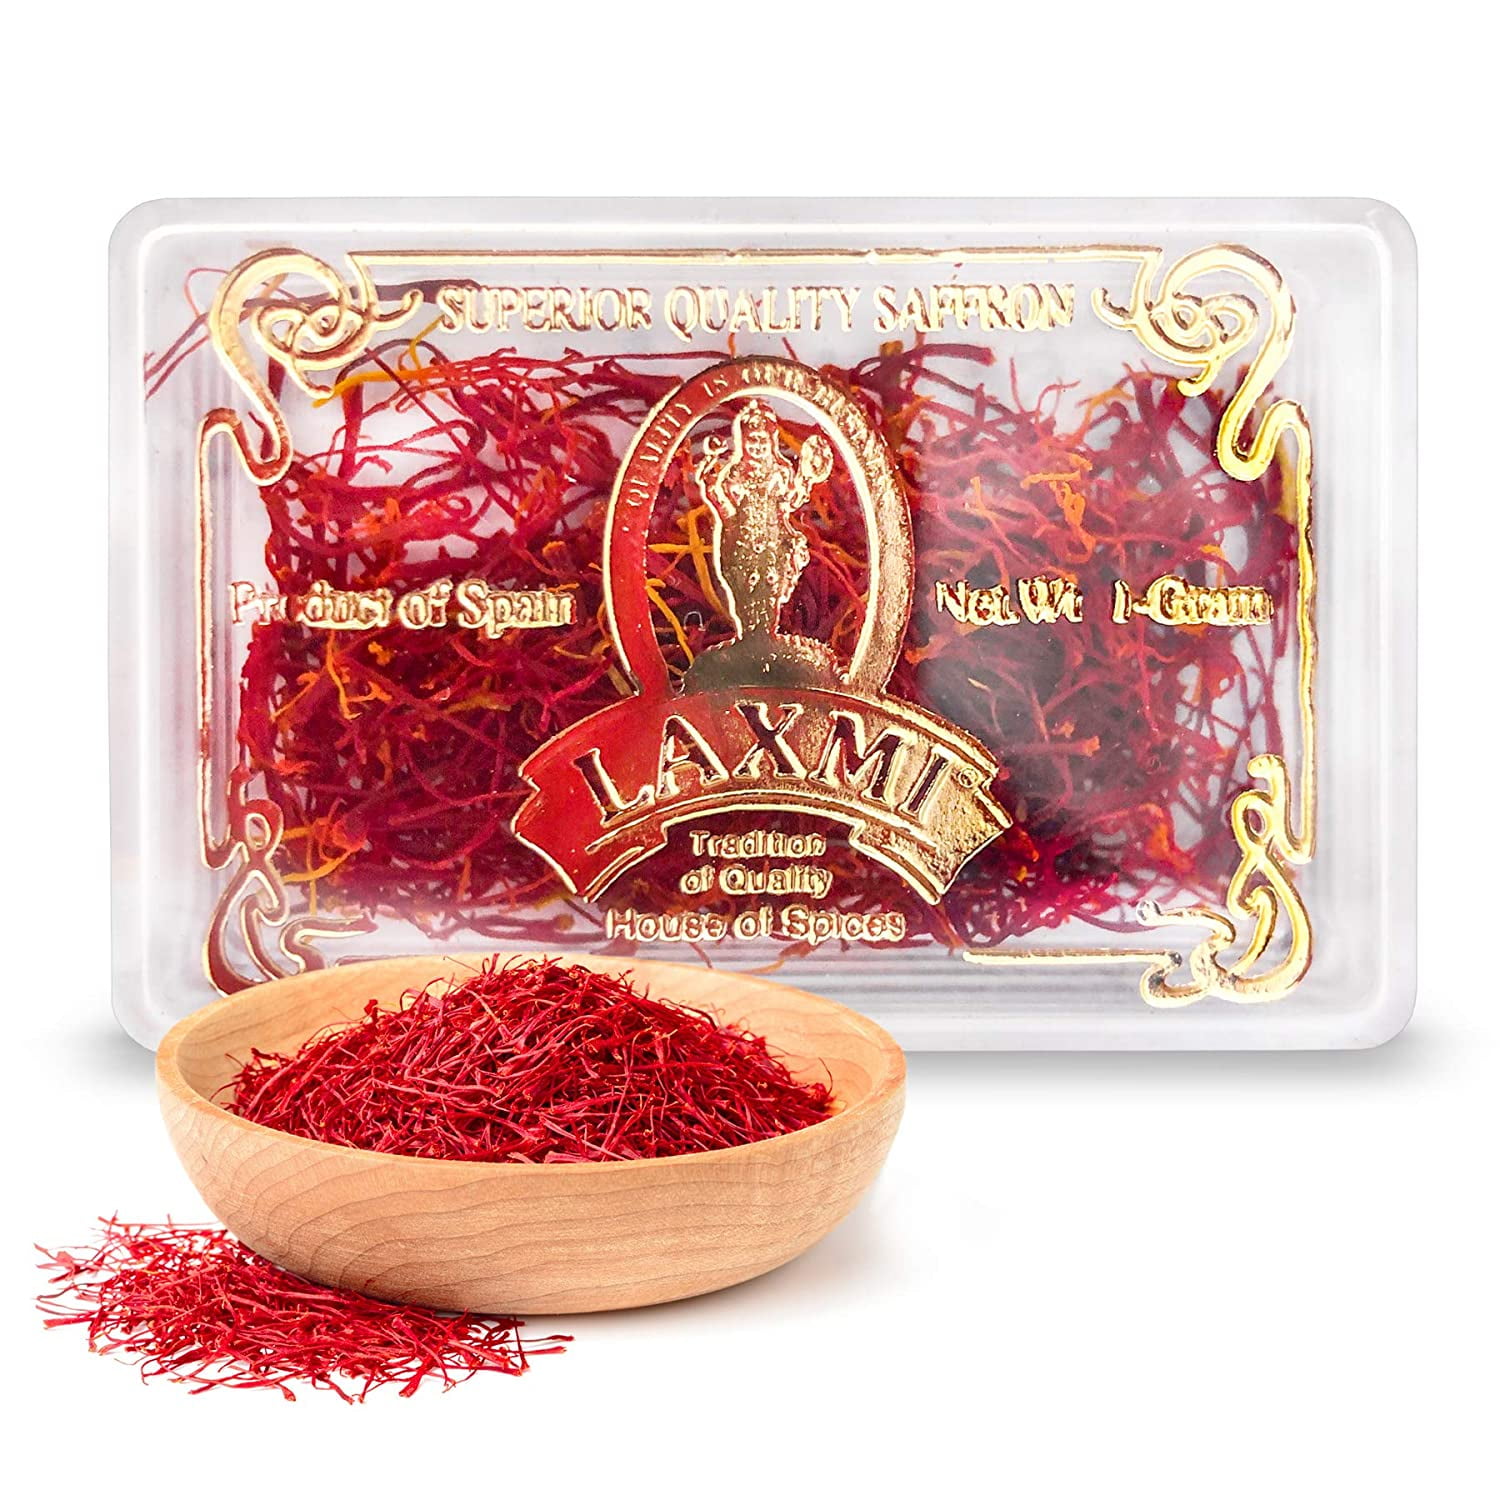 House of Spices (Product of Spain) - 1 Gram - Walmart.com